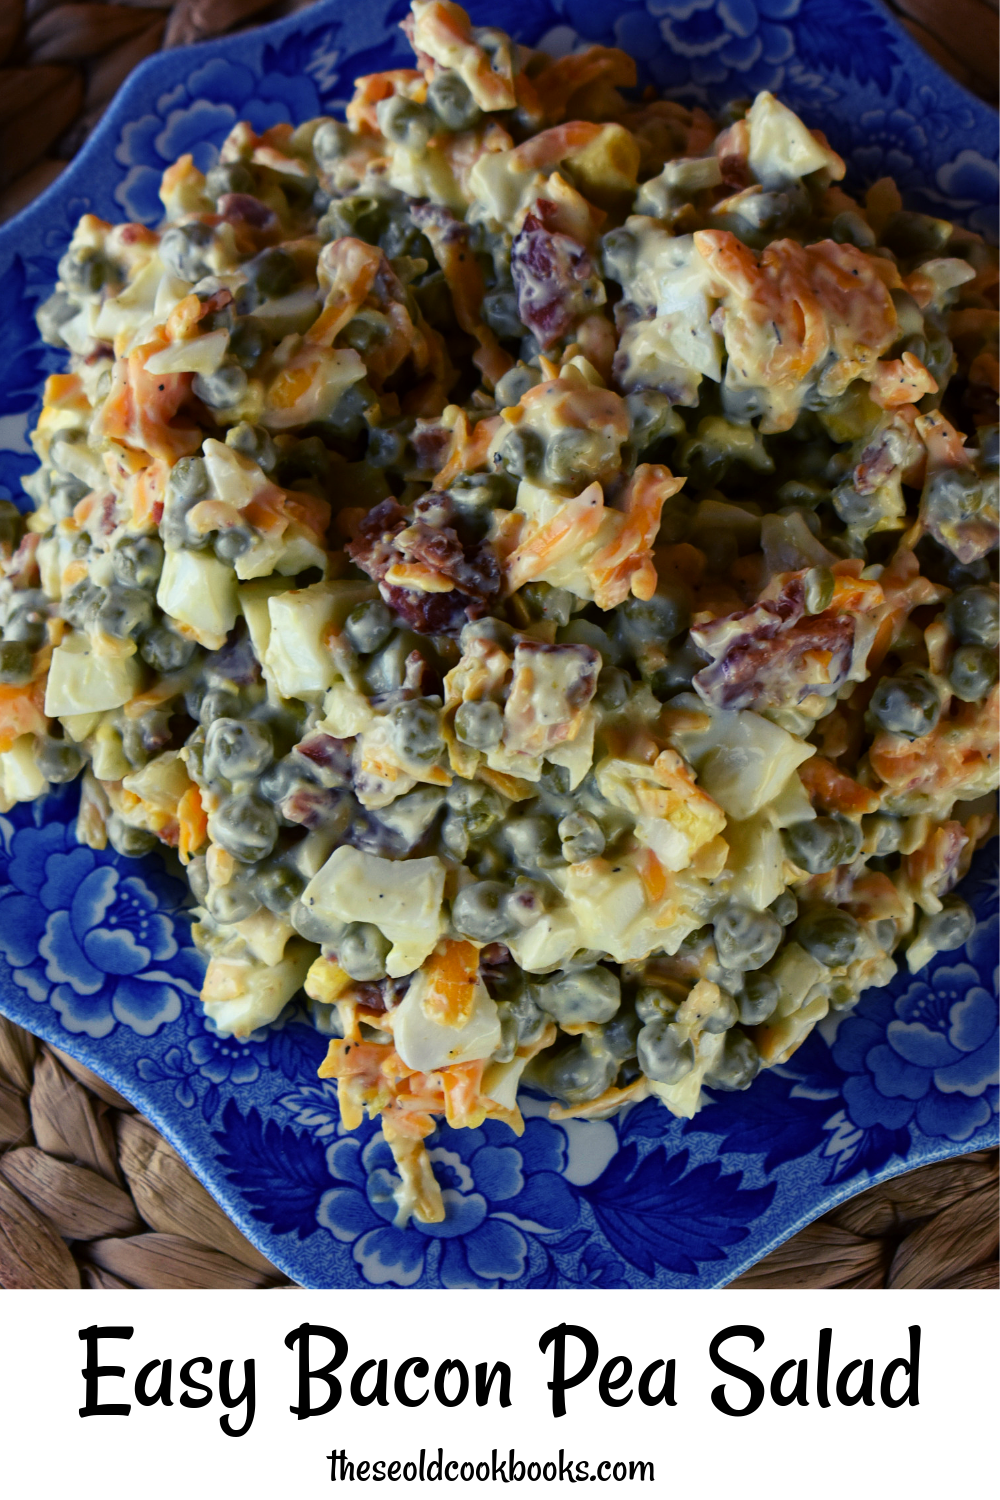 Easy Bacon Pea Salad –  A Pea Salad Recipe With Egg and Bacon